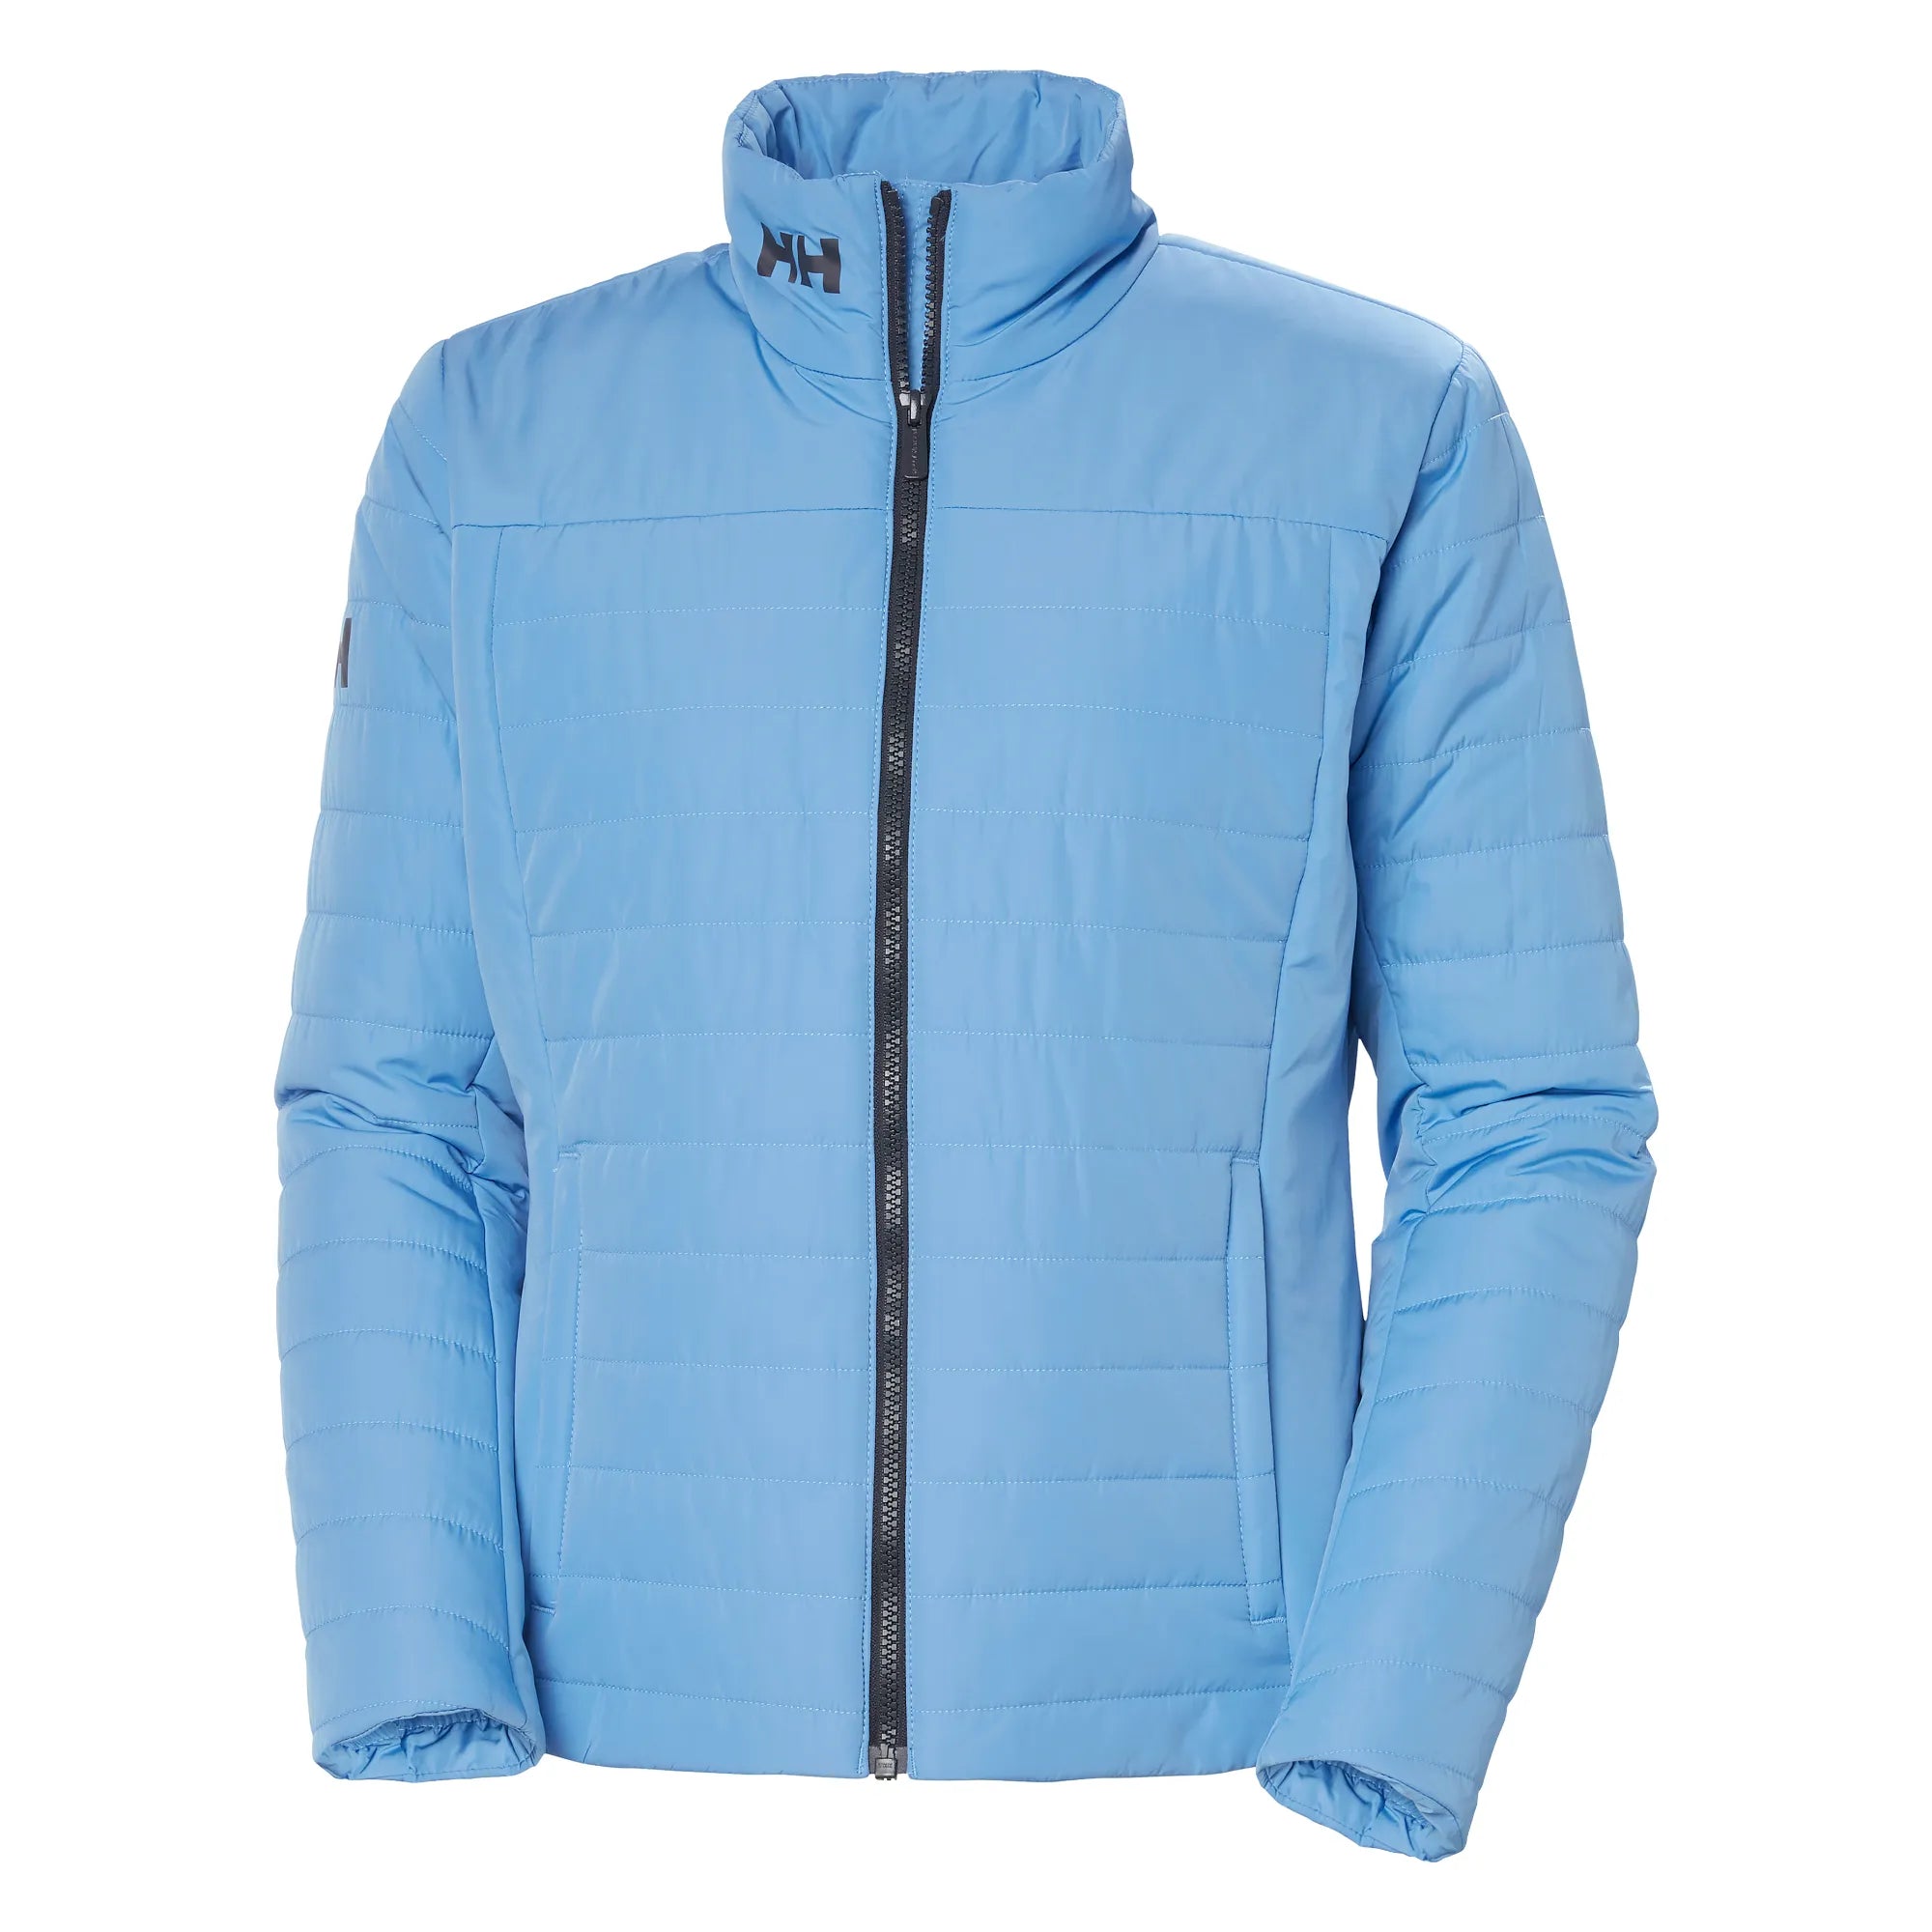 Womens Crew Insulated Sailing Jacket - Bright Blue